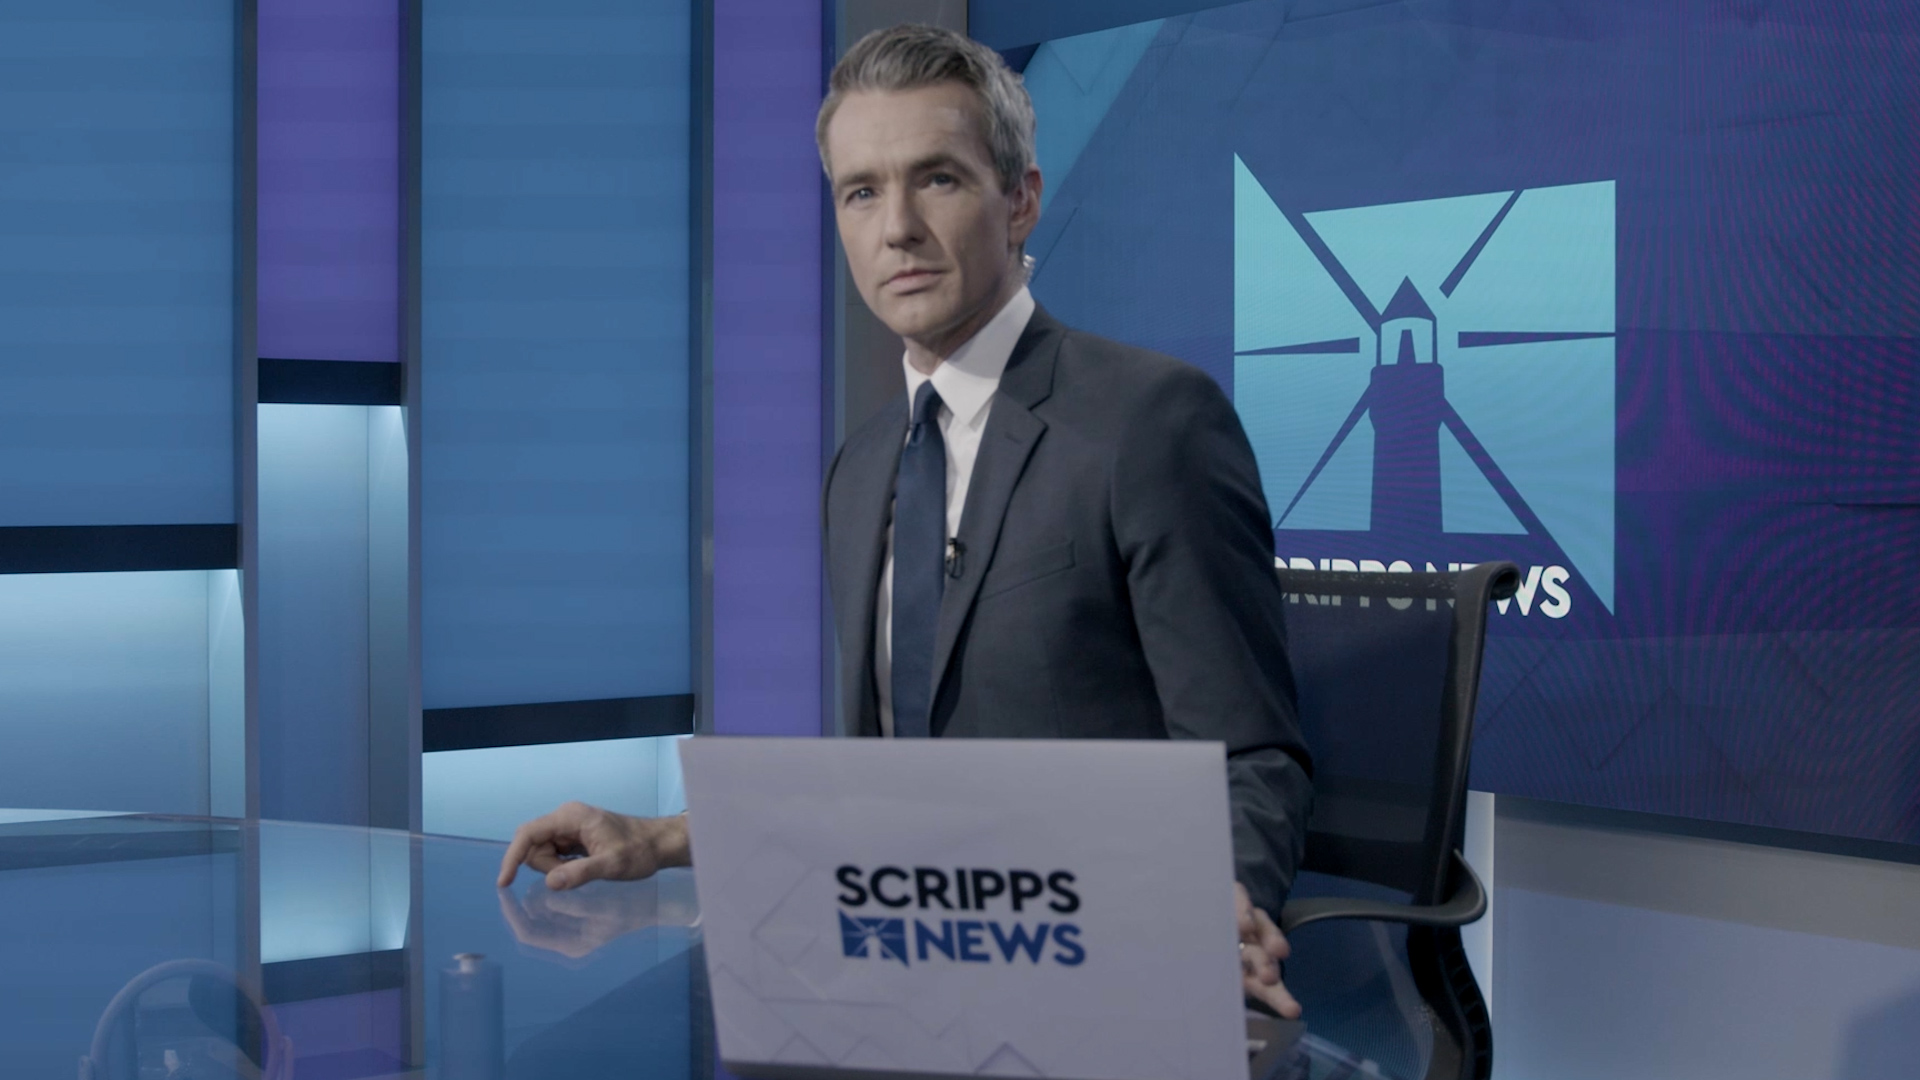 photo of a scripps news anchor in a grey suit, sitting in front of a blue background with the scripps news logo